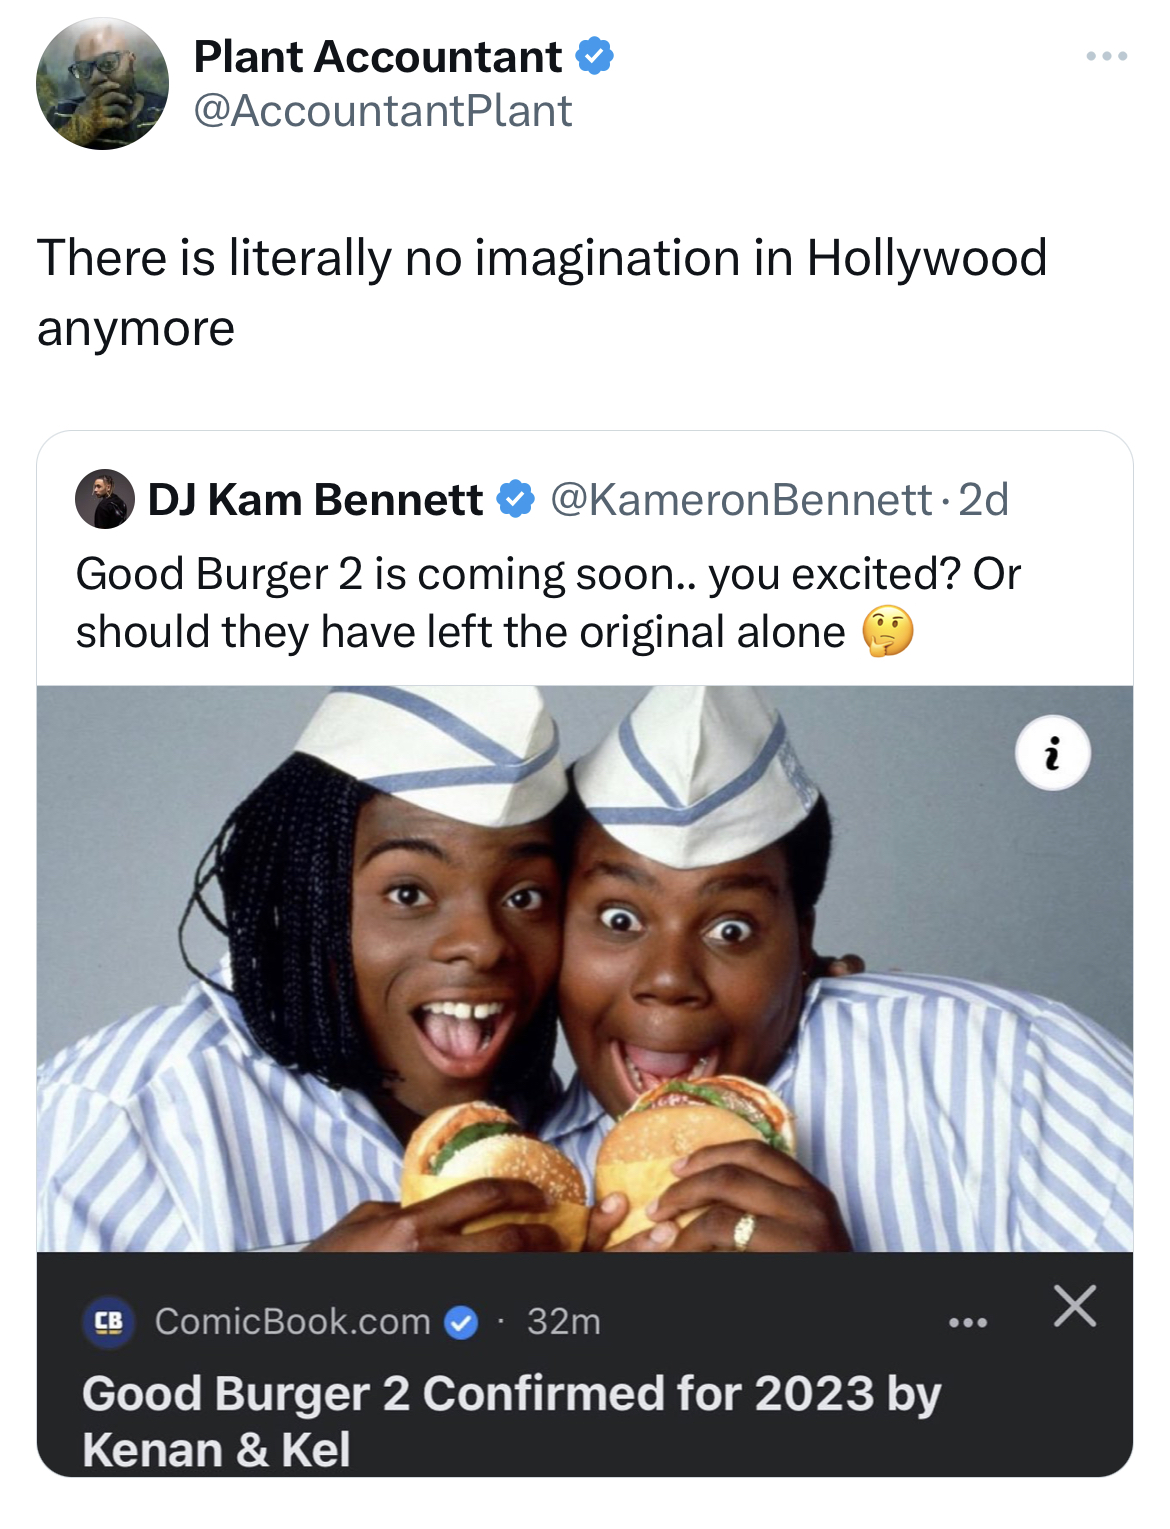 savage tweets - fat good burger movie - Plant Accountant There is literally no imagination in Hollywood anymore Dj Kam Bennett Good Burger 2 is coming soon.. you excited? Or should they have left the original alone Cb ComicBook.com 32m Good Burger 2 Confi